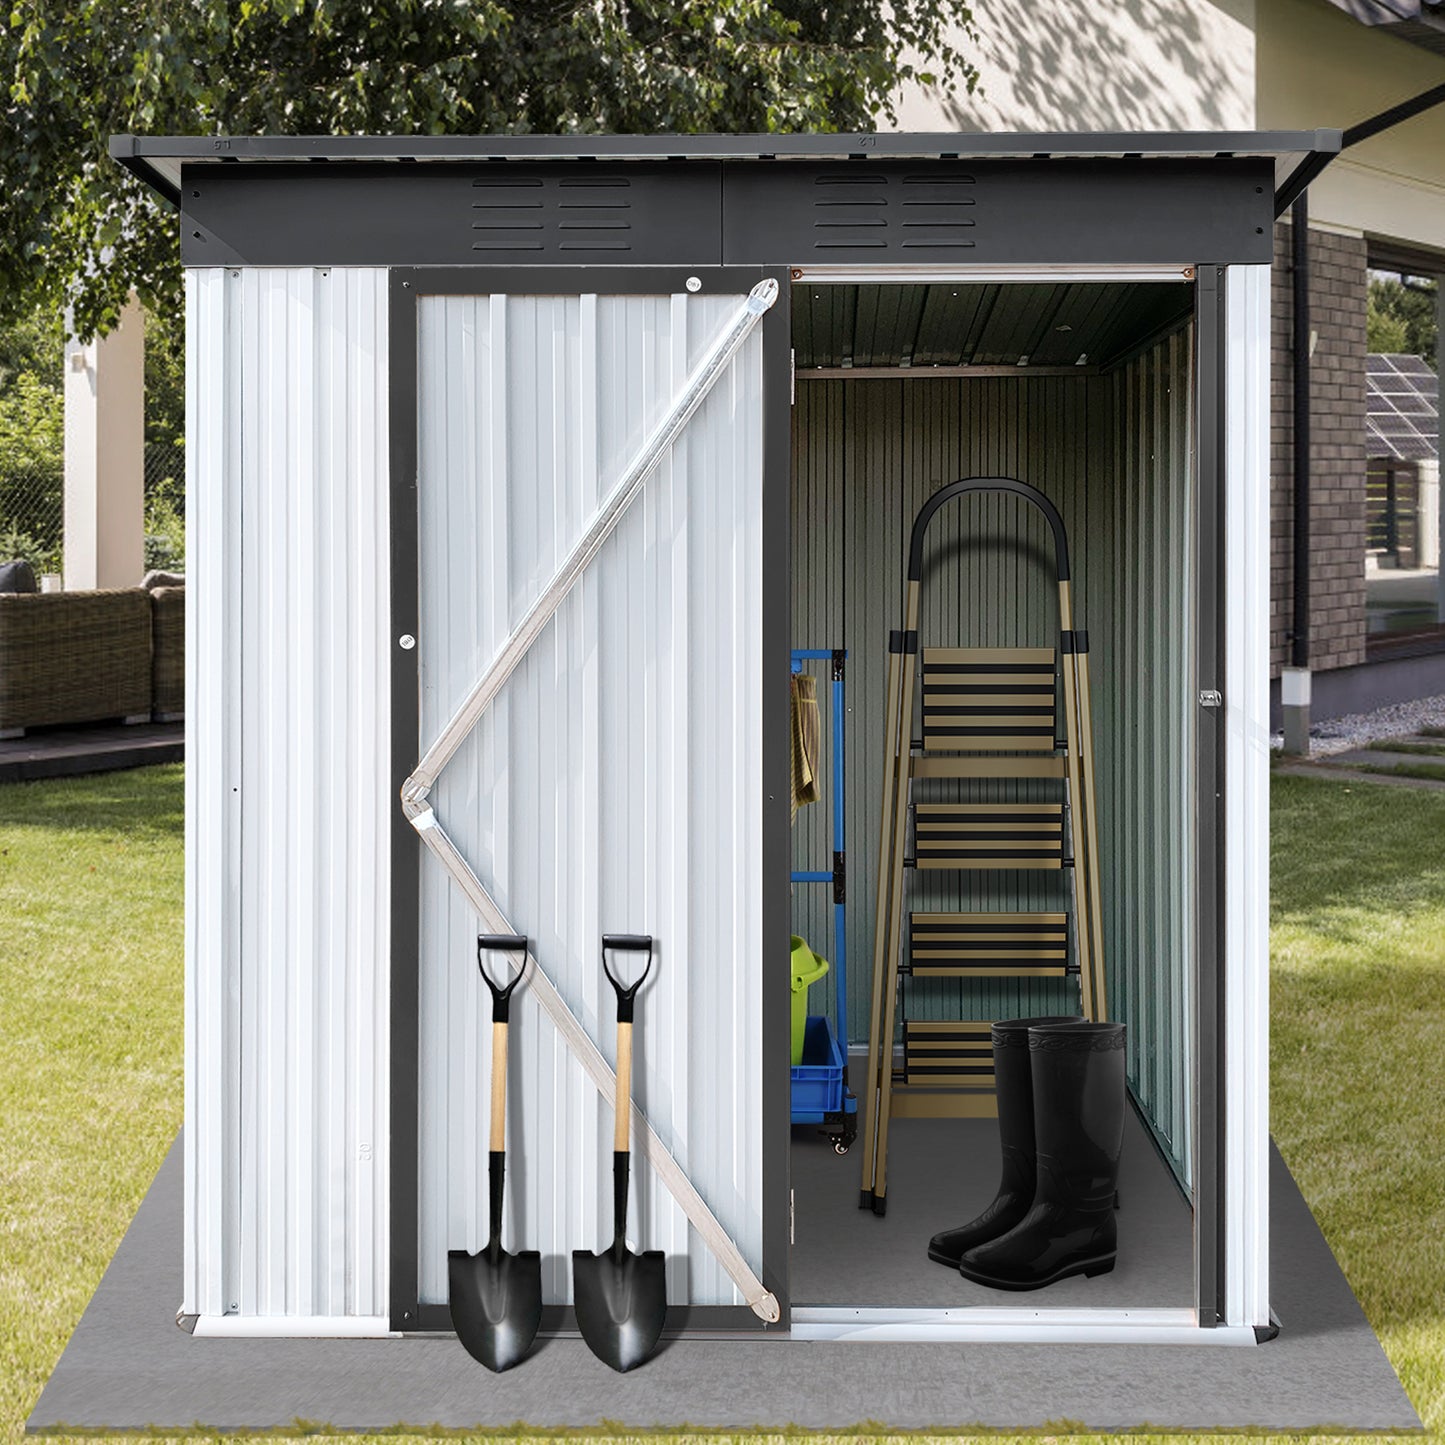 SYNGAR 5' x 3' Outdoor Metal Storage Shed, Garden Shed for Tools, Trash Can, Storage Shed with Single Lockable Door, for Backyard, Patio, Lawn, D6644